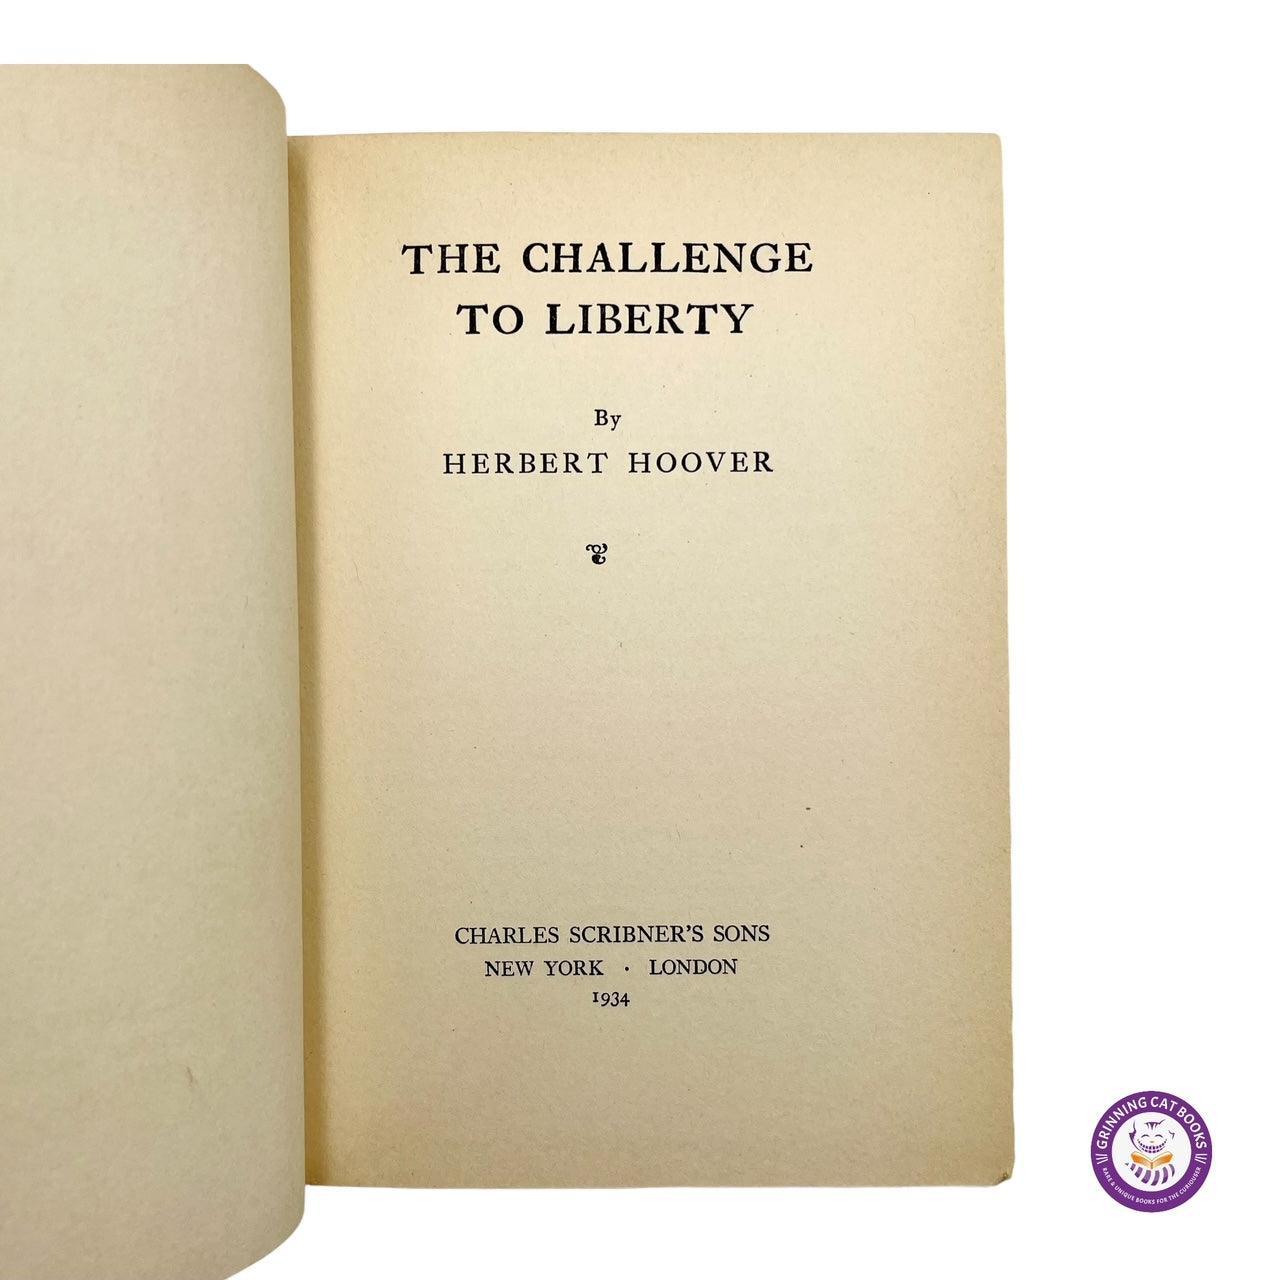 The Challenge to Liberty (signed by President Hoover) - Grinning Cat Books - AMERICANA - AMERICAN HISTORY, HISTORY, PRESIDENTS, SIGNED